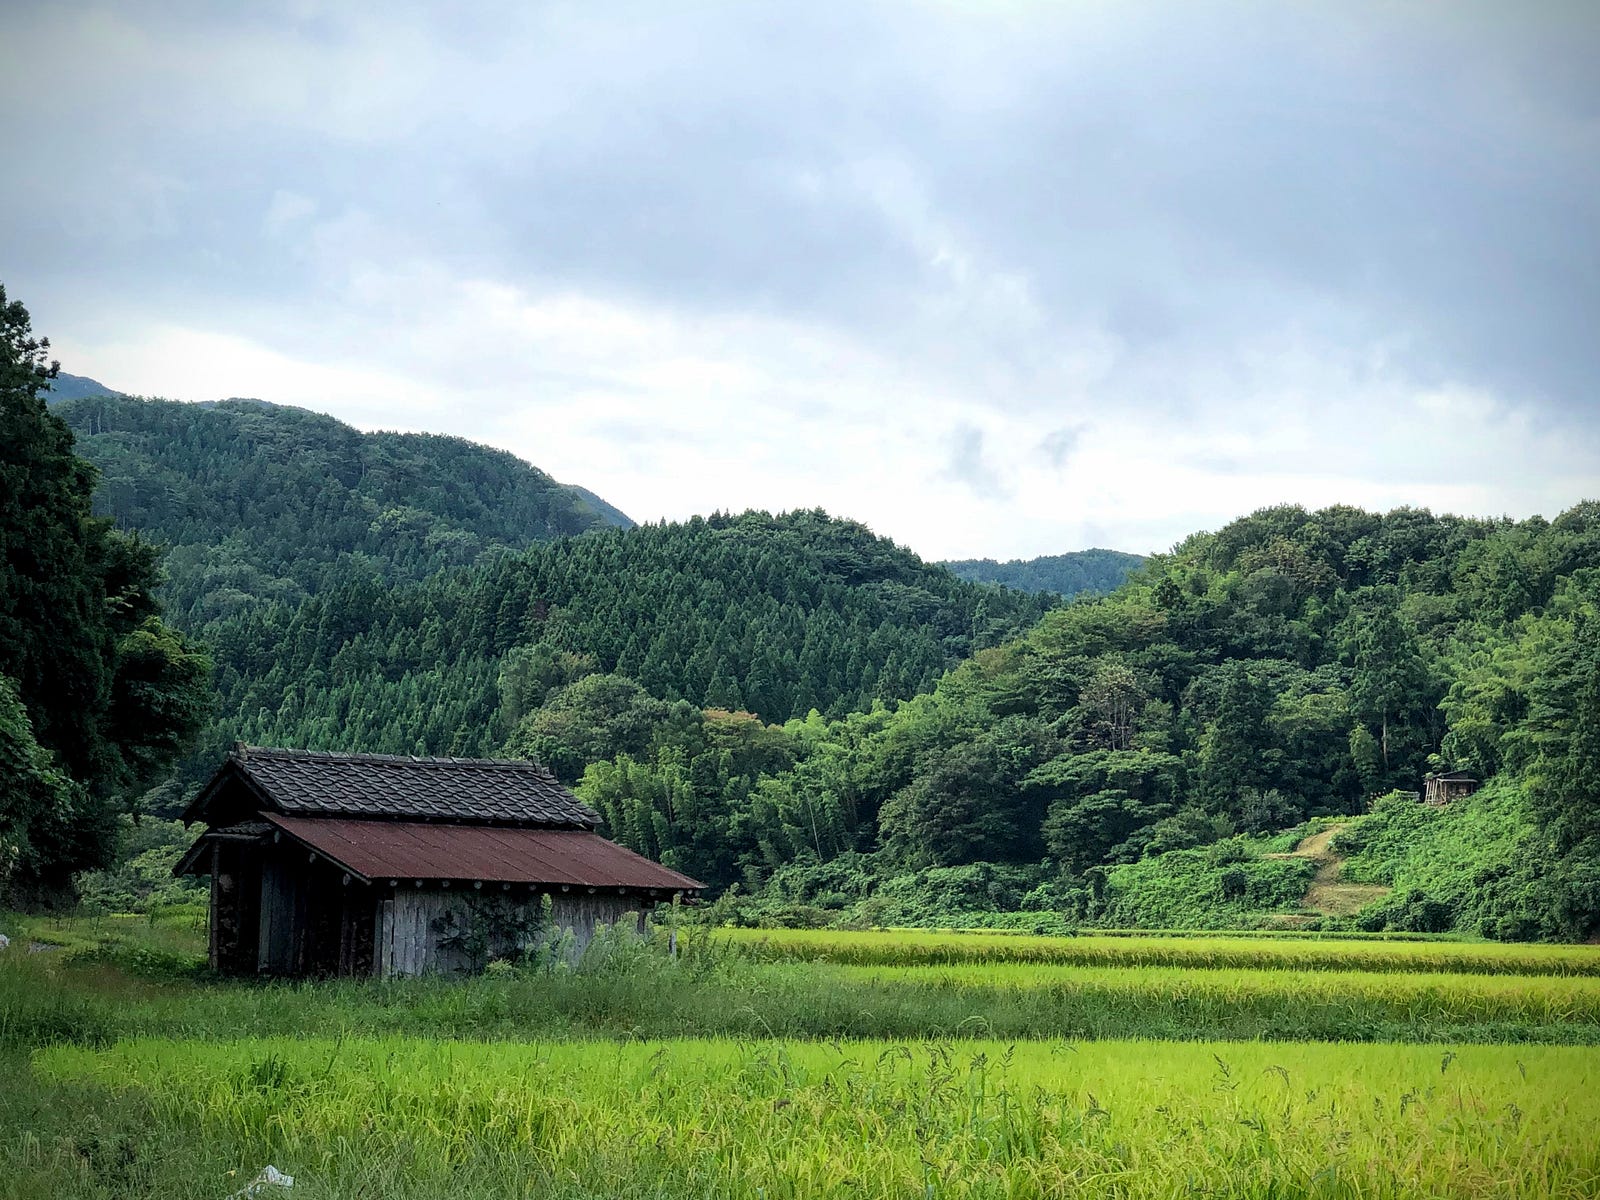 A shack in a rice field with Mt. Fujikura in the background